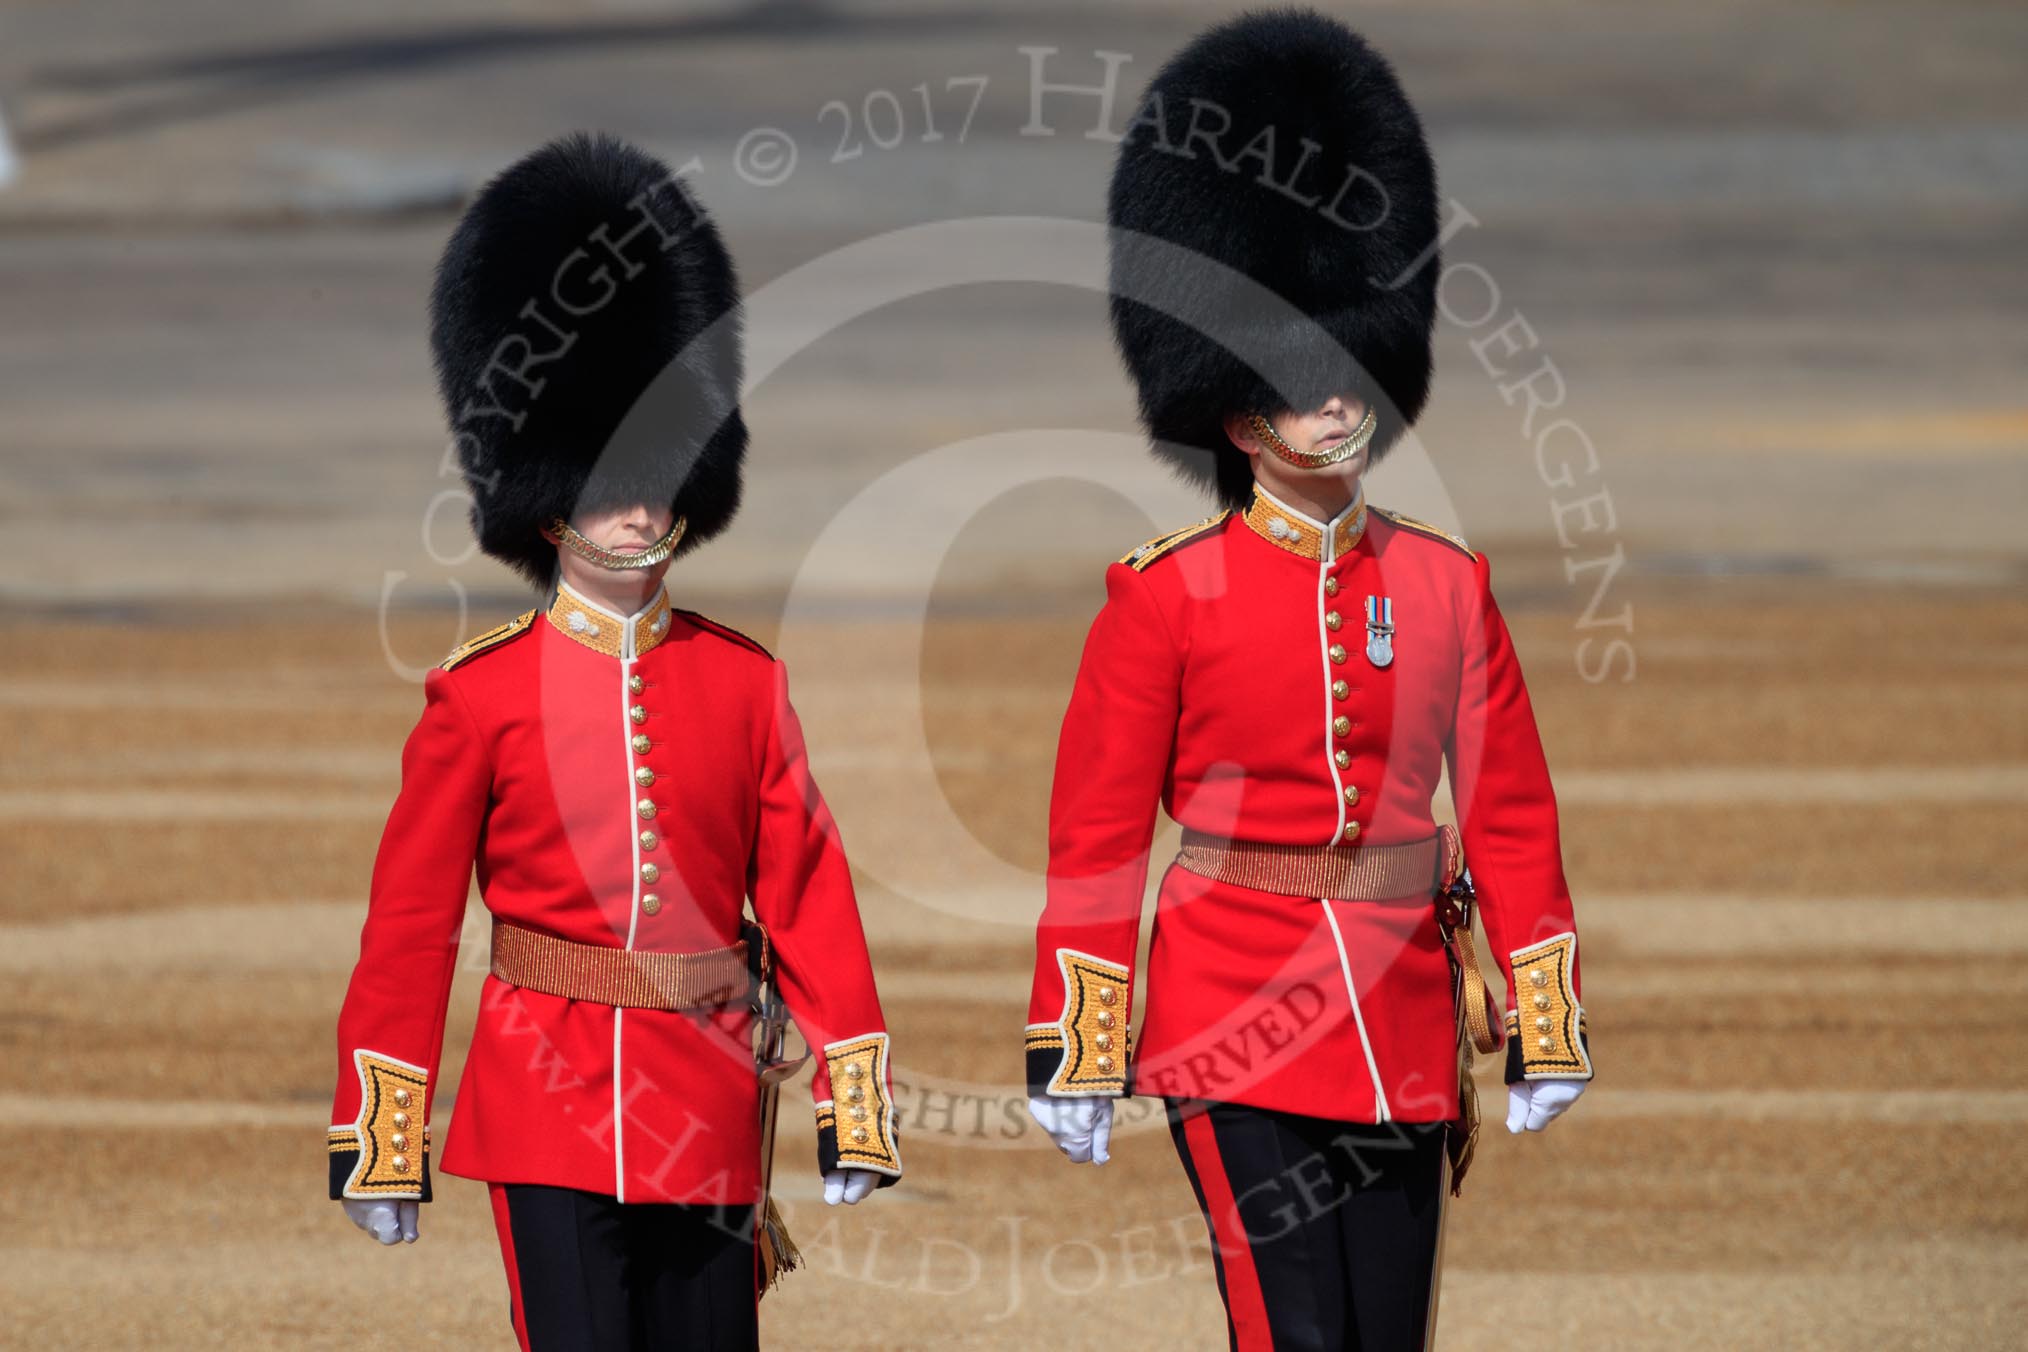 The Ensign, 2nd Lieutenant Felix Tracey, and The Captain of the Guard, Major Hamish Hardy, Number Five Guard, Nijmegen Company, Grenadier Guards, marching to Horse Guards Parade before Trooping the Colour 2018, The Queen's Birthday Parade at Horse Guards Parade, Westminster, London, 9 June 2018, 09:50.